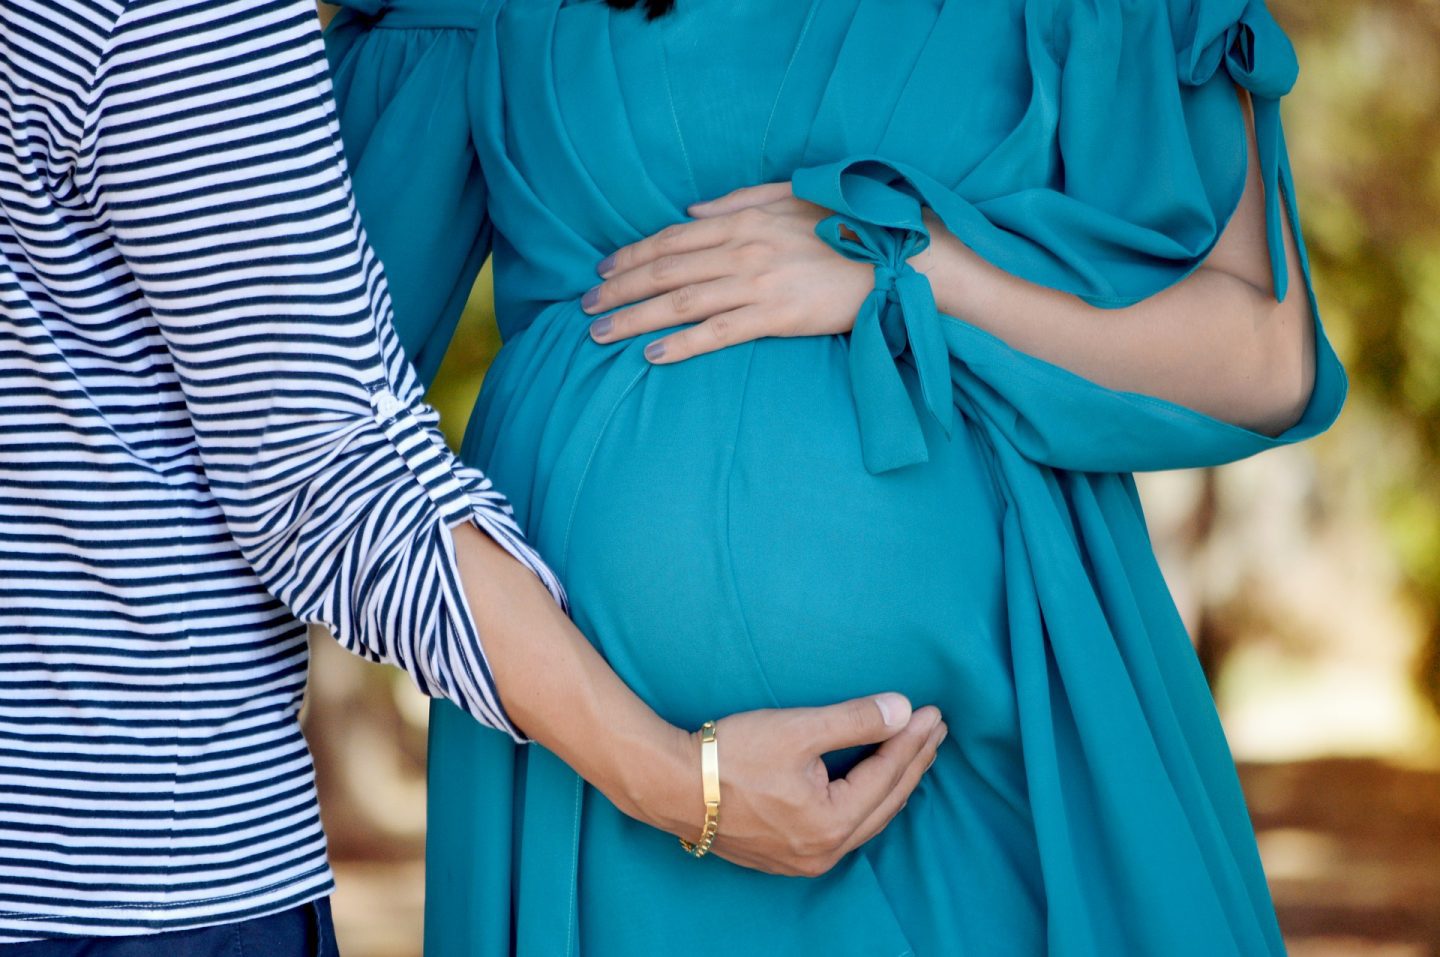 Pregnancy and the secrets of the third trimester - what are the pregnancy secrets, signs and symptoms no-one tells you about being in the final trimester of pregnancy and so close to having a baby?